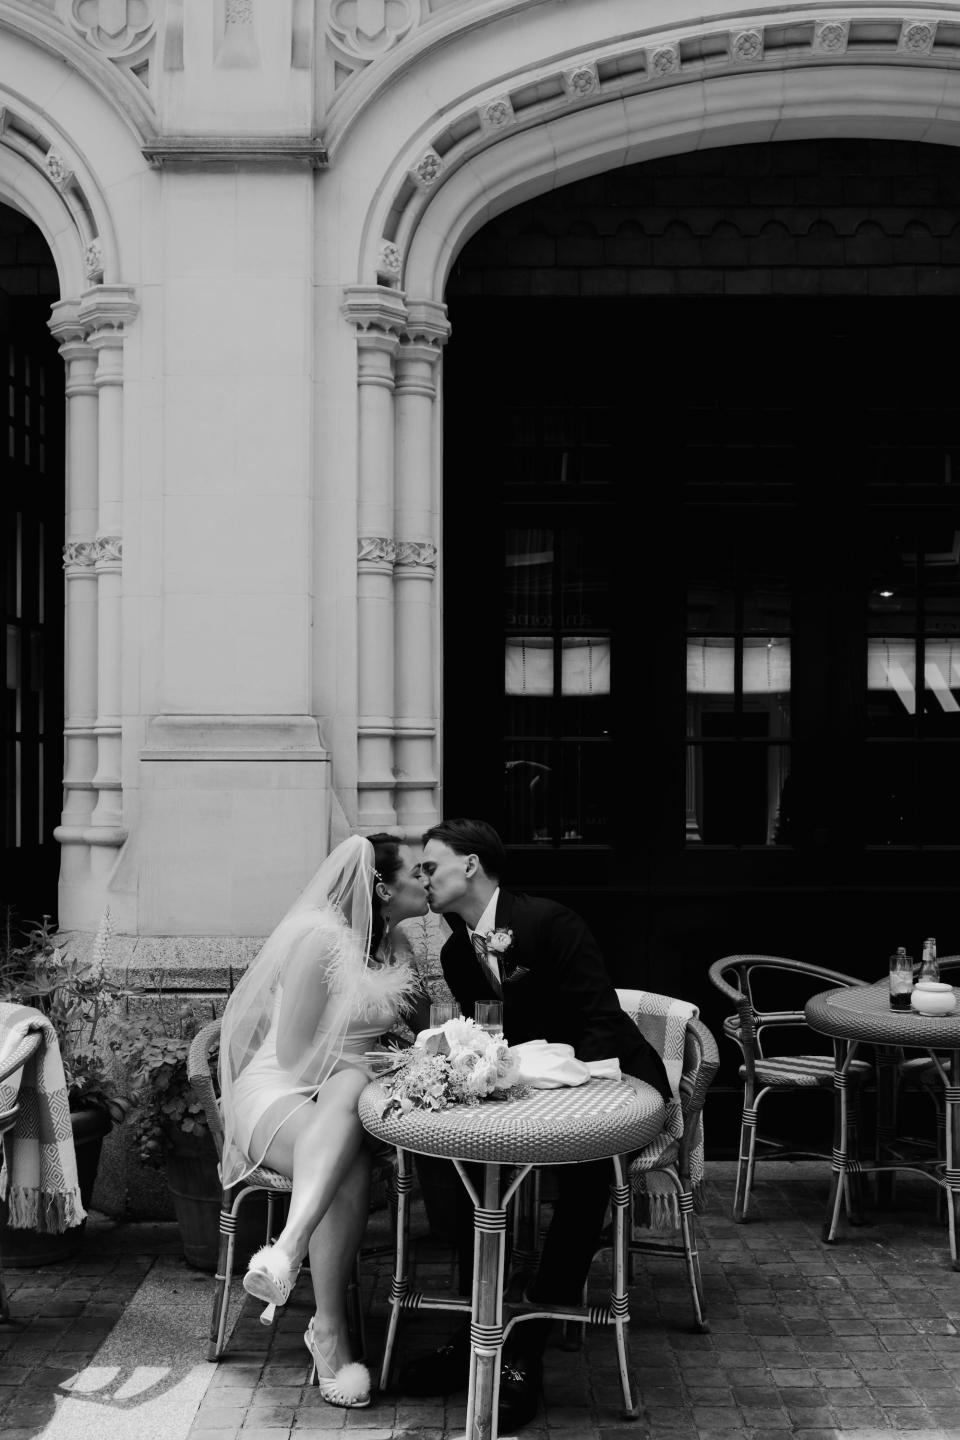 A black and white photo of a bride and groom kissing at an outdoor table on their wedding table.